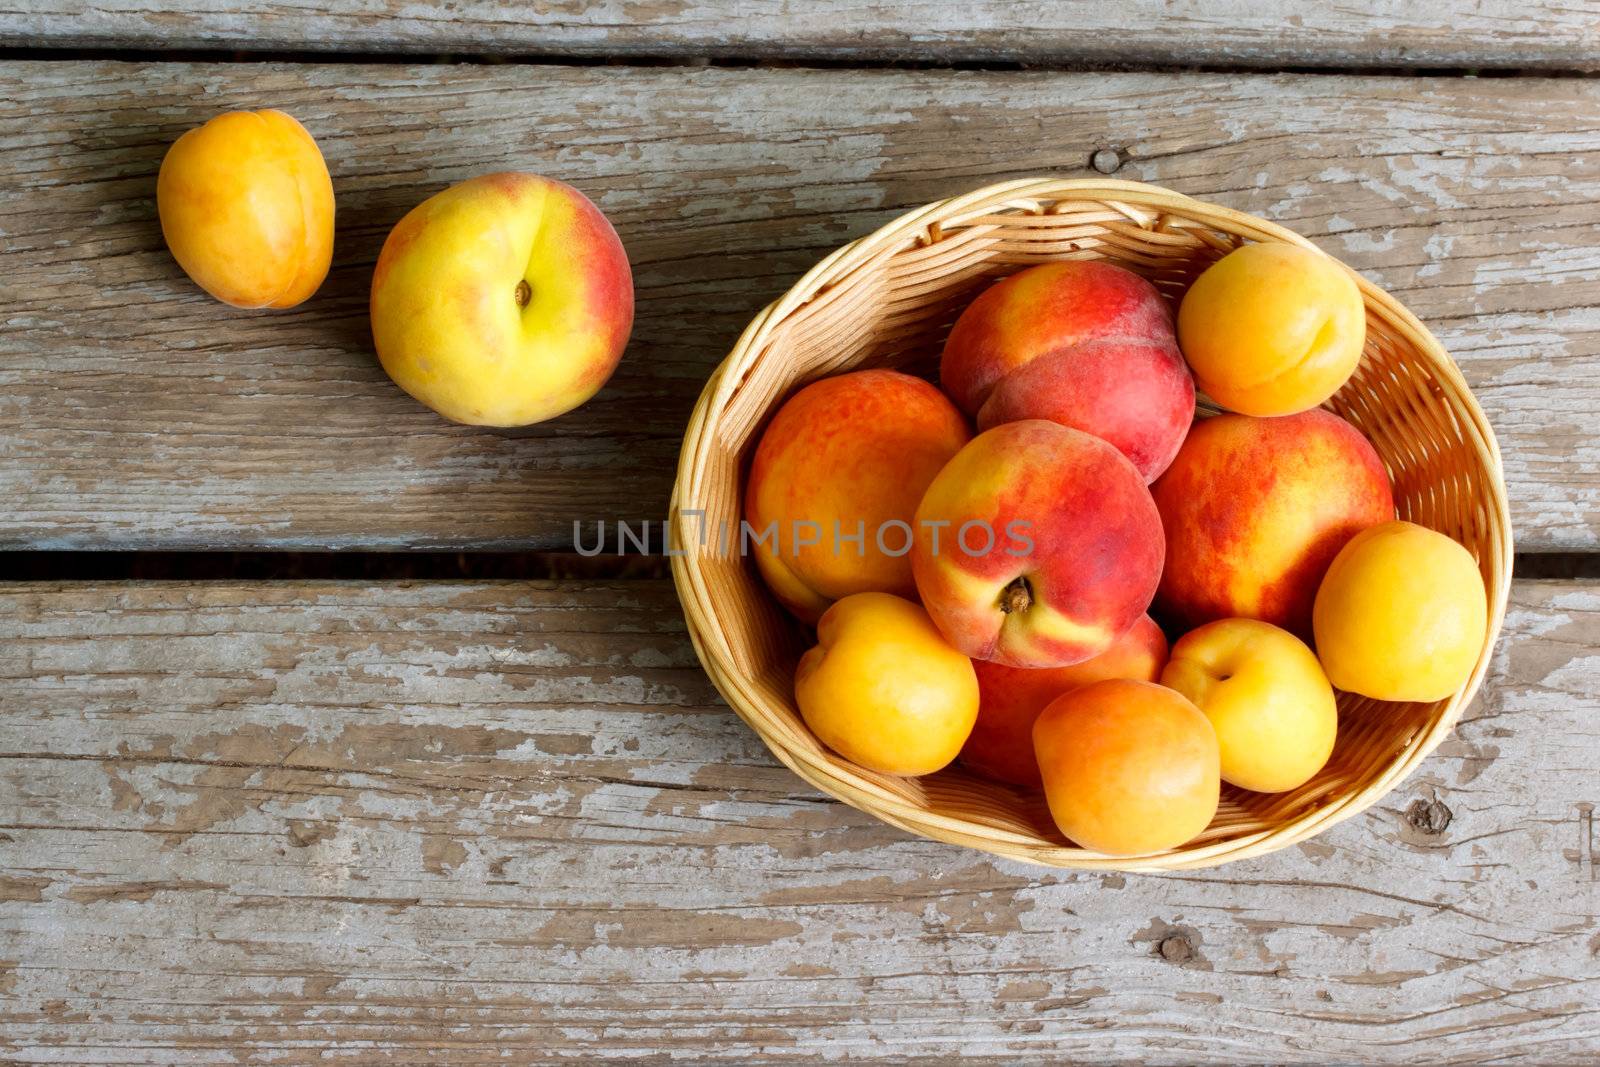 Juicy peaches and apricots by melpomene